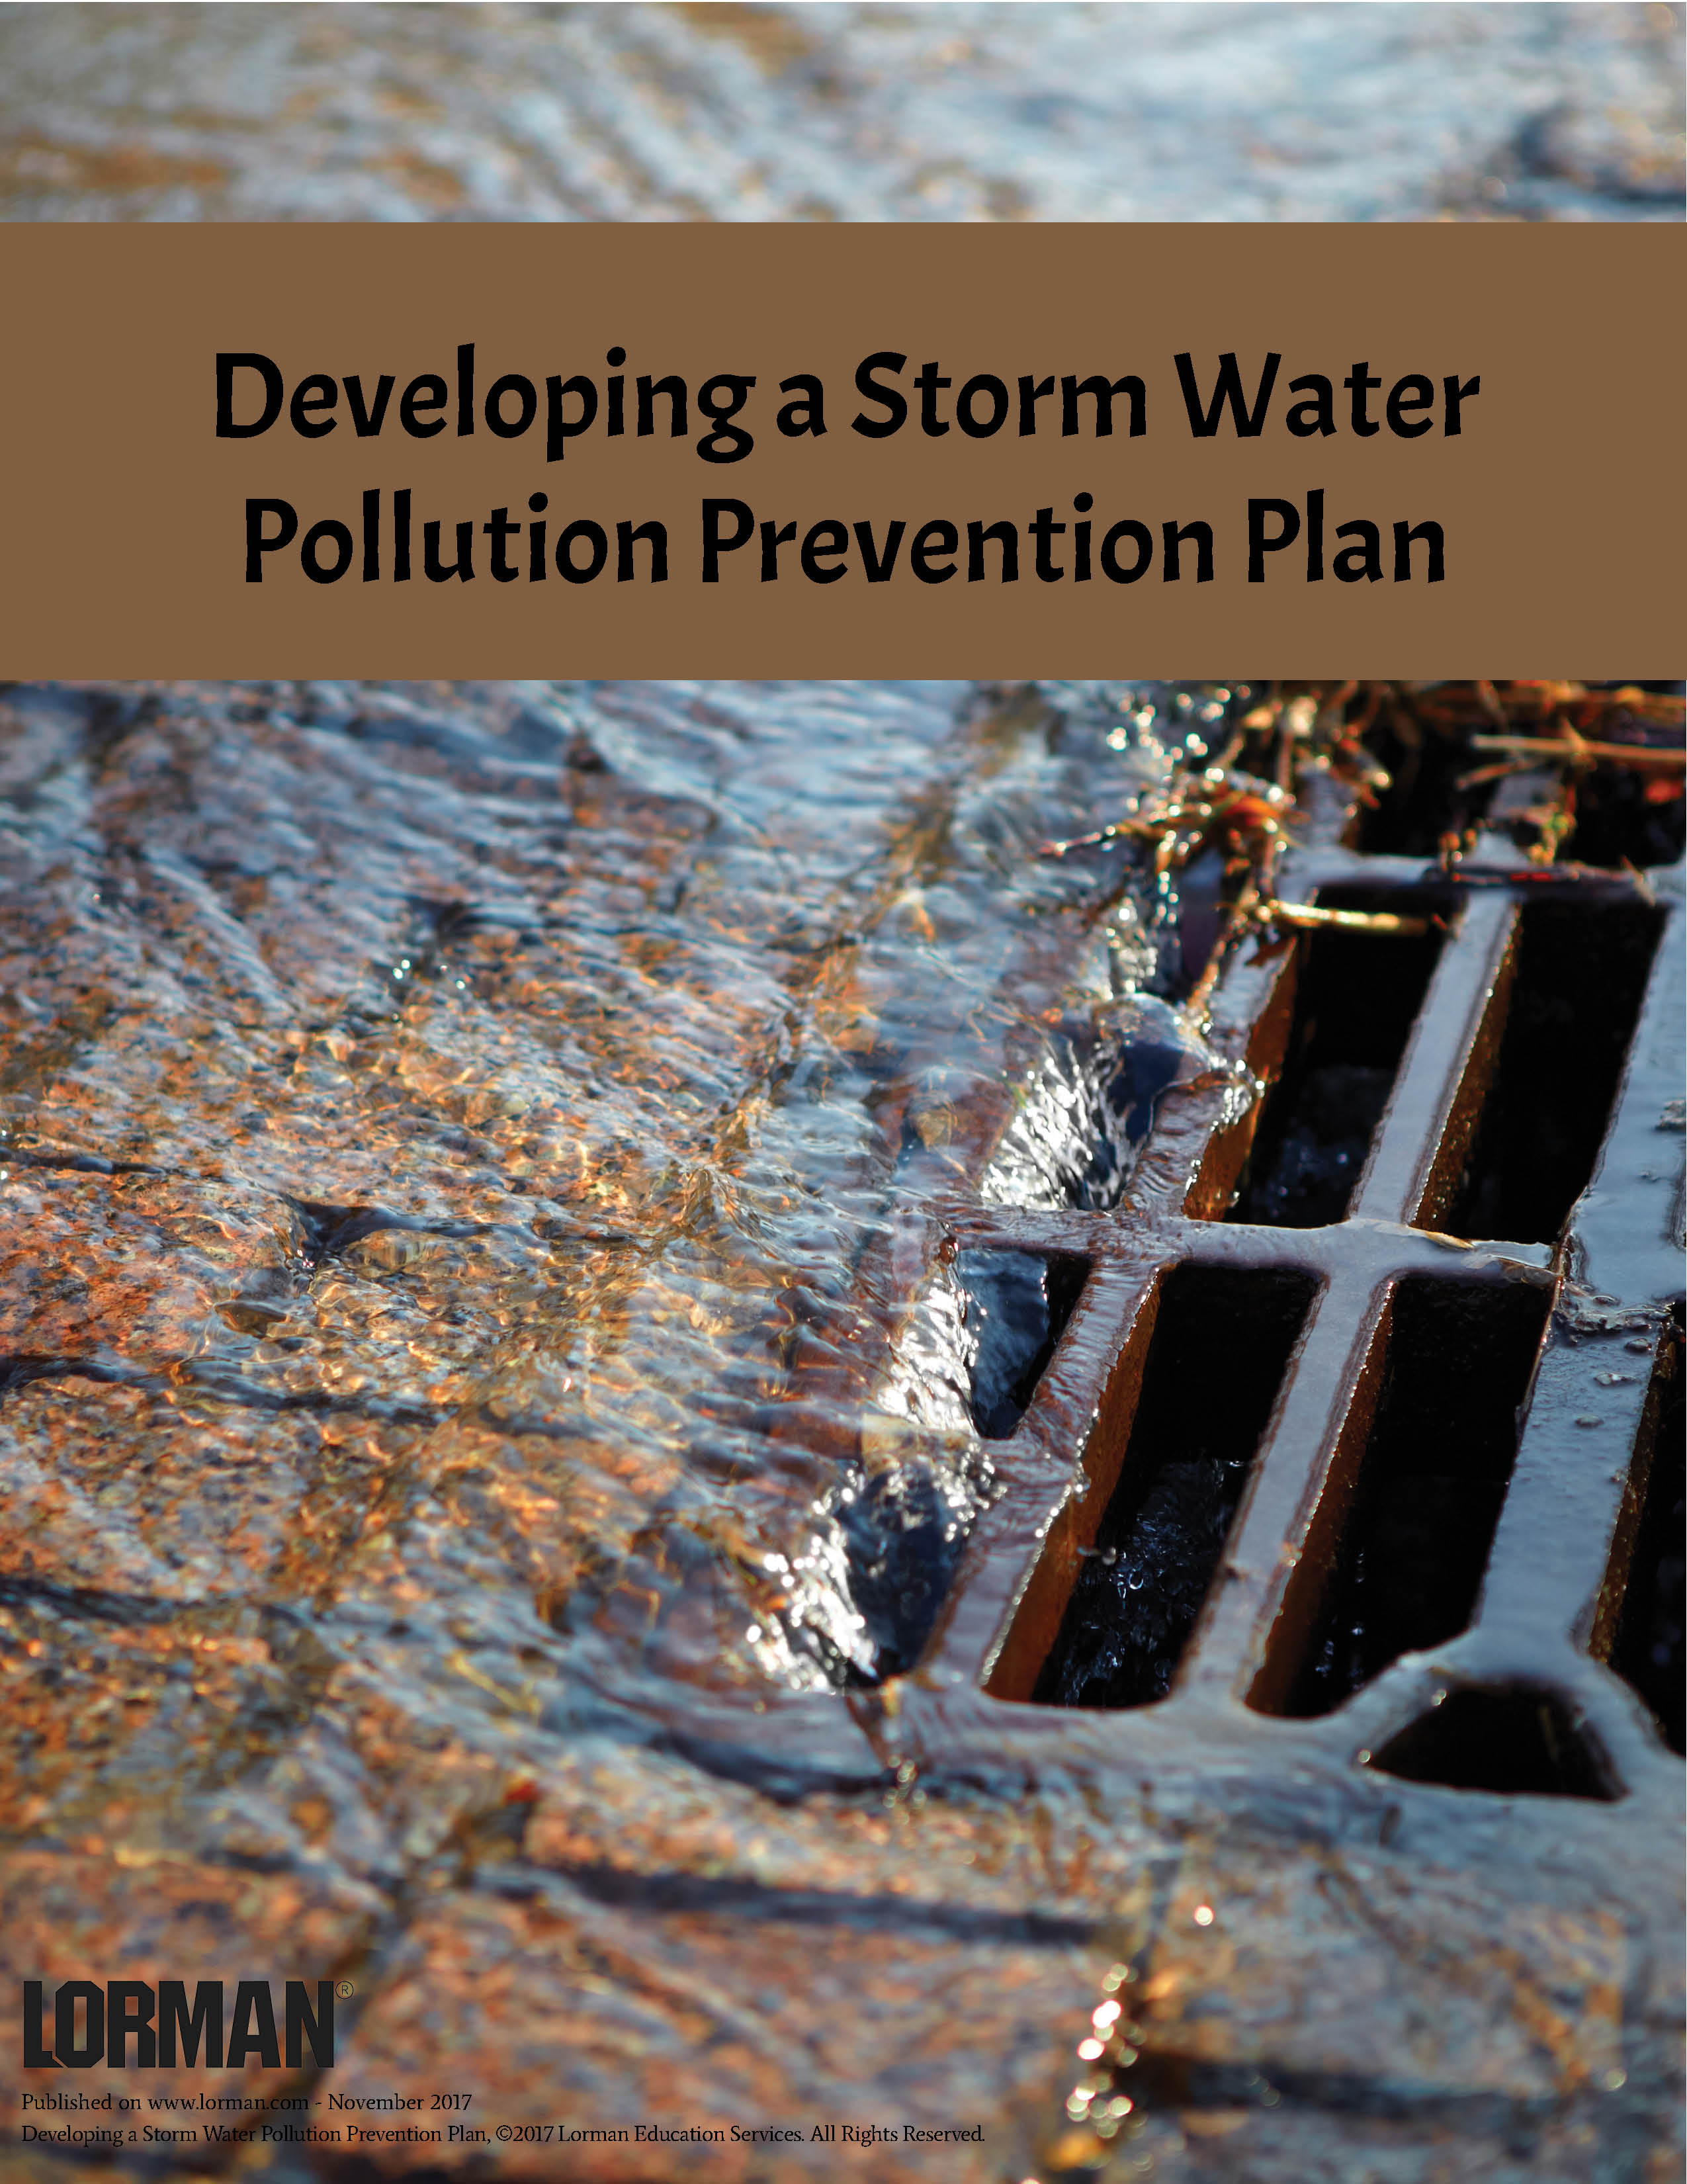 Developing a Storm Water Pollution Prevention Plan